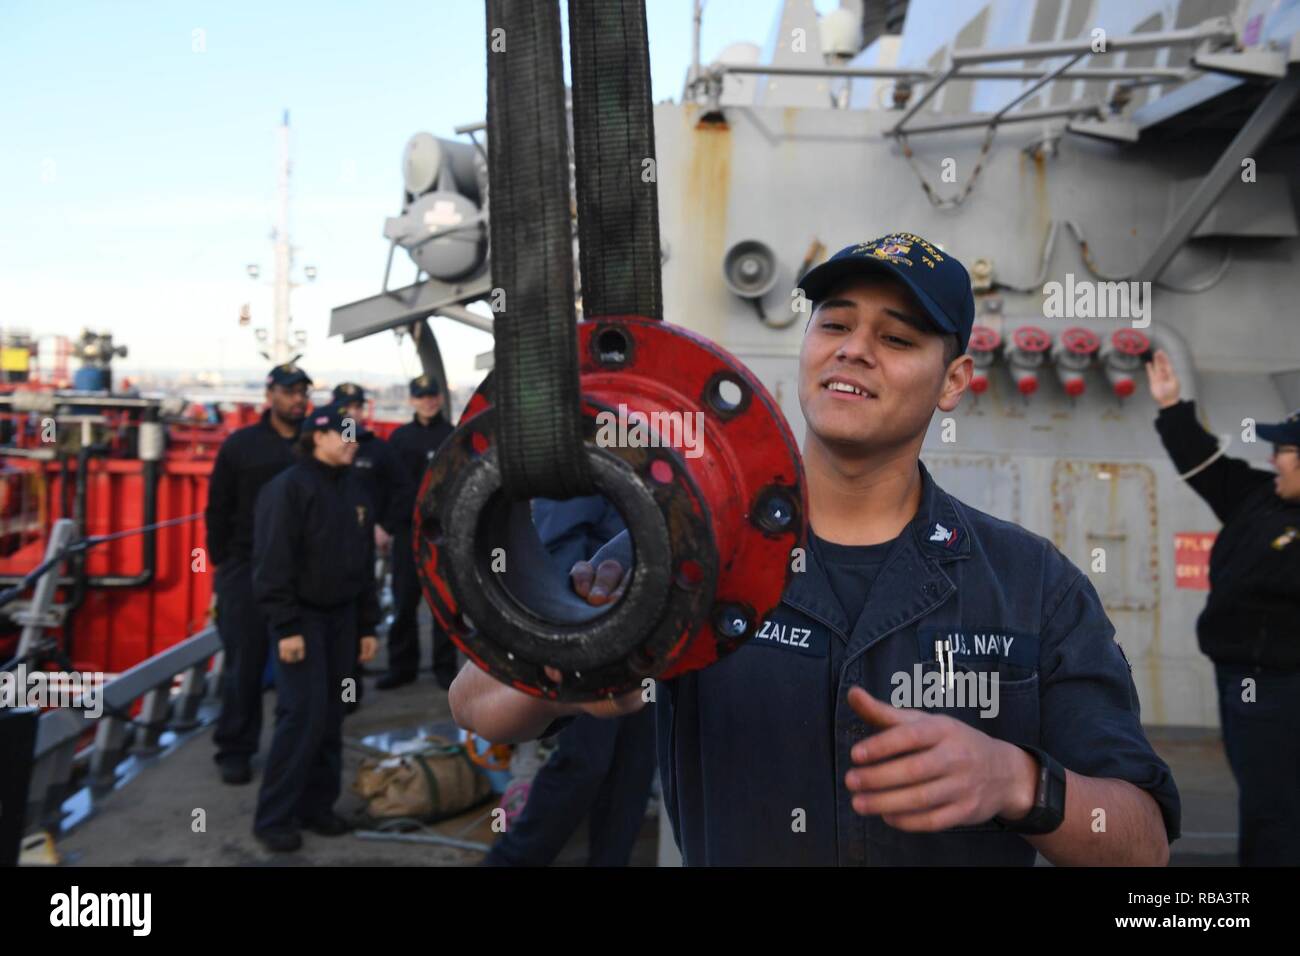 - VALENCIA, Spain (Dec. 20, 2016) Petty Officer 3rd Class Enrique Gonzalez, from San Bernardino, Calif., hoists a fuel line adapter aboard the guided-missile destroyer USS Porter (DDG 78) as the ship prepares to take on fuel pier-side in Valencia, Spain, Dec. 20, 2016. Porter, forward-deployed to Rota, Spain, is conducting naval operations in the U.S. 6th Fleet area of operations in support of U.S. national security interests in Europe. Stock Photo